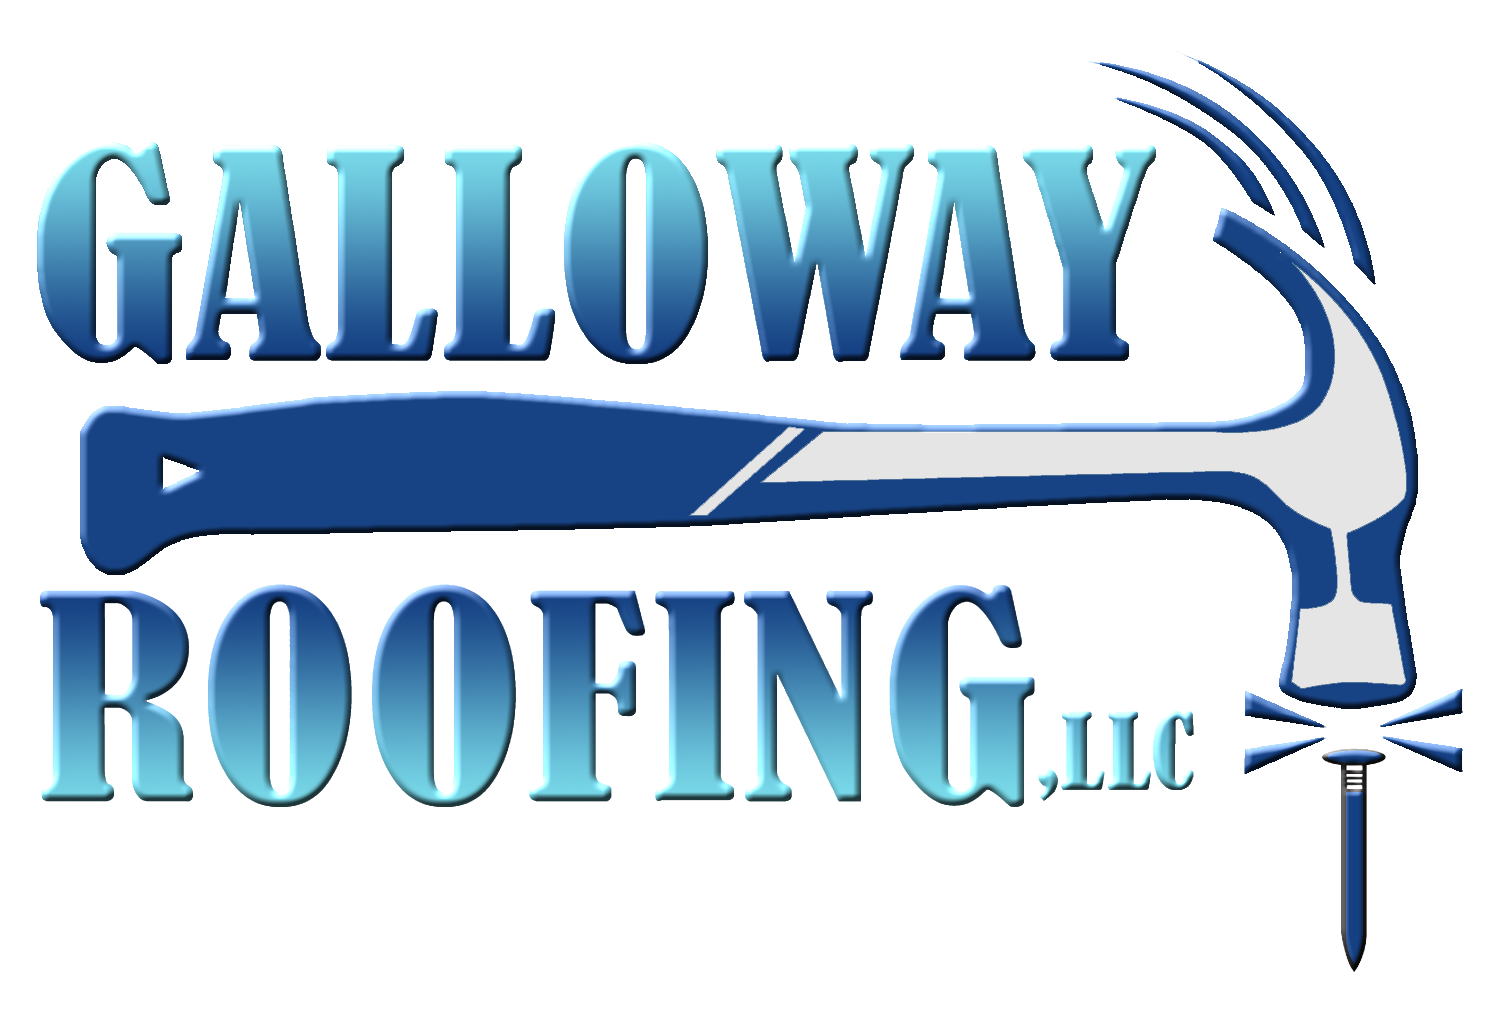 Galloway Roofing